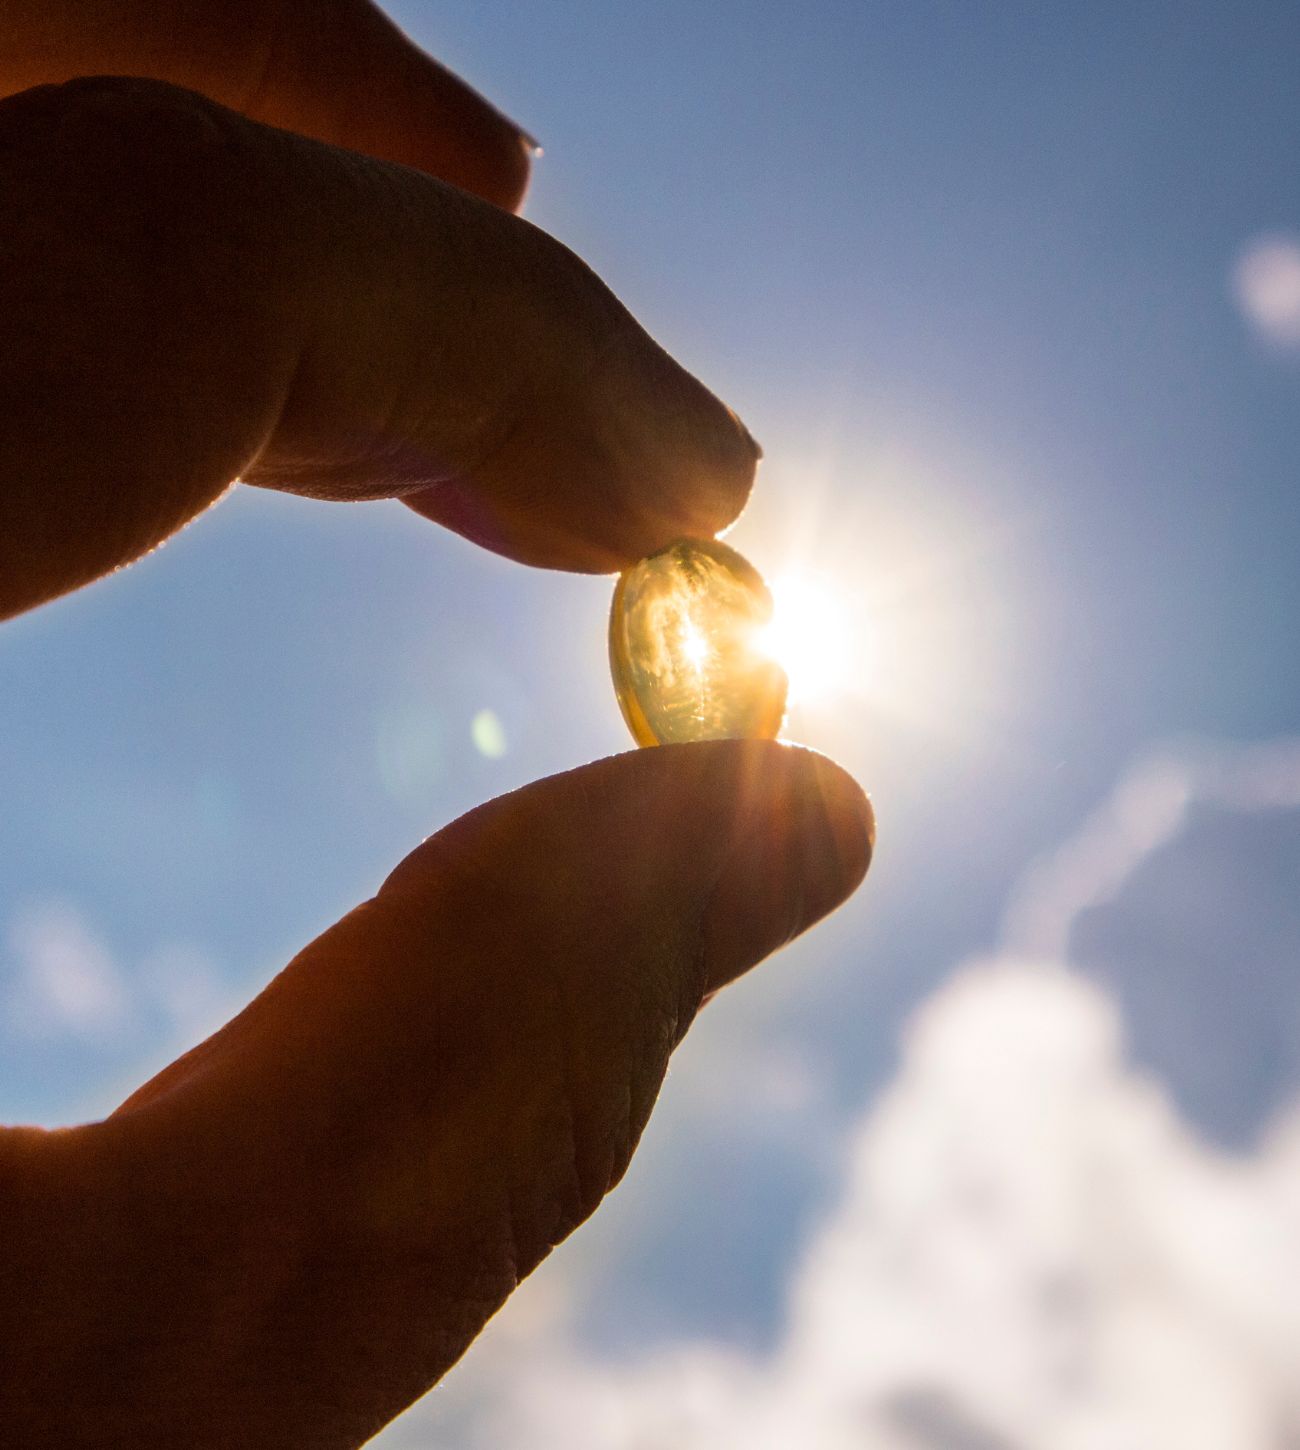 Photo of a vitamin D3 capsule being held in a hand against the sun.